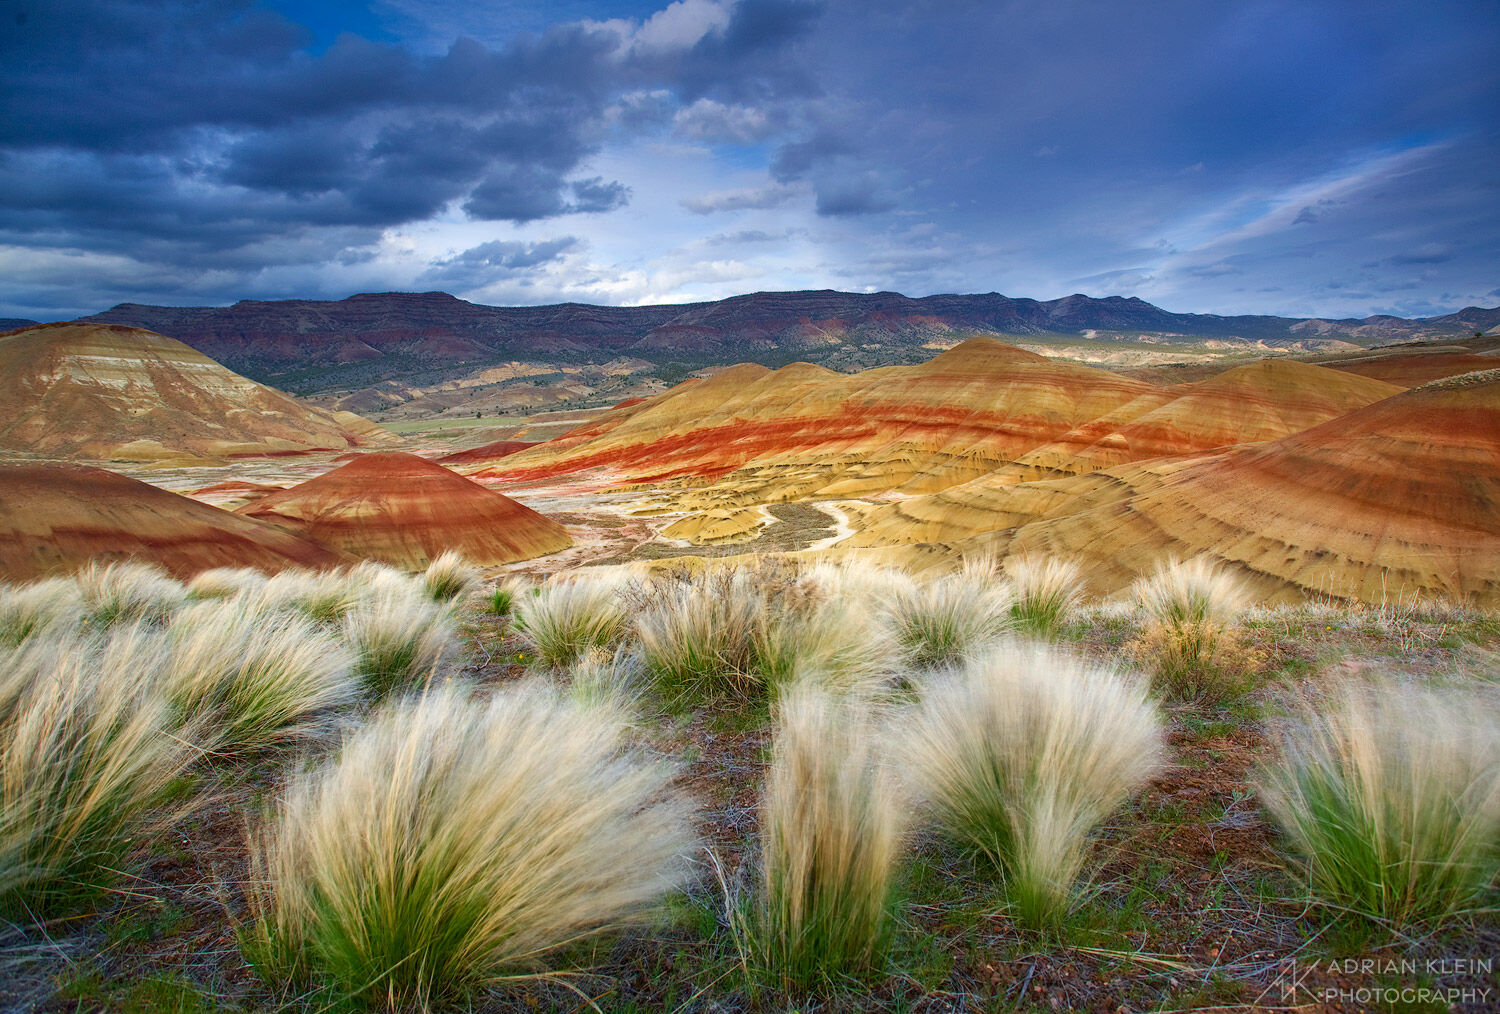 A strong wind storm swaying the bunch grass around rolls through the Painted Hills, Oregon. Limited Edition of 100.